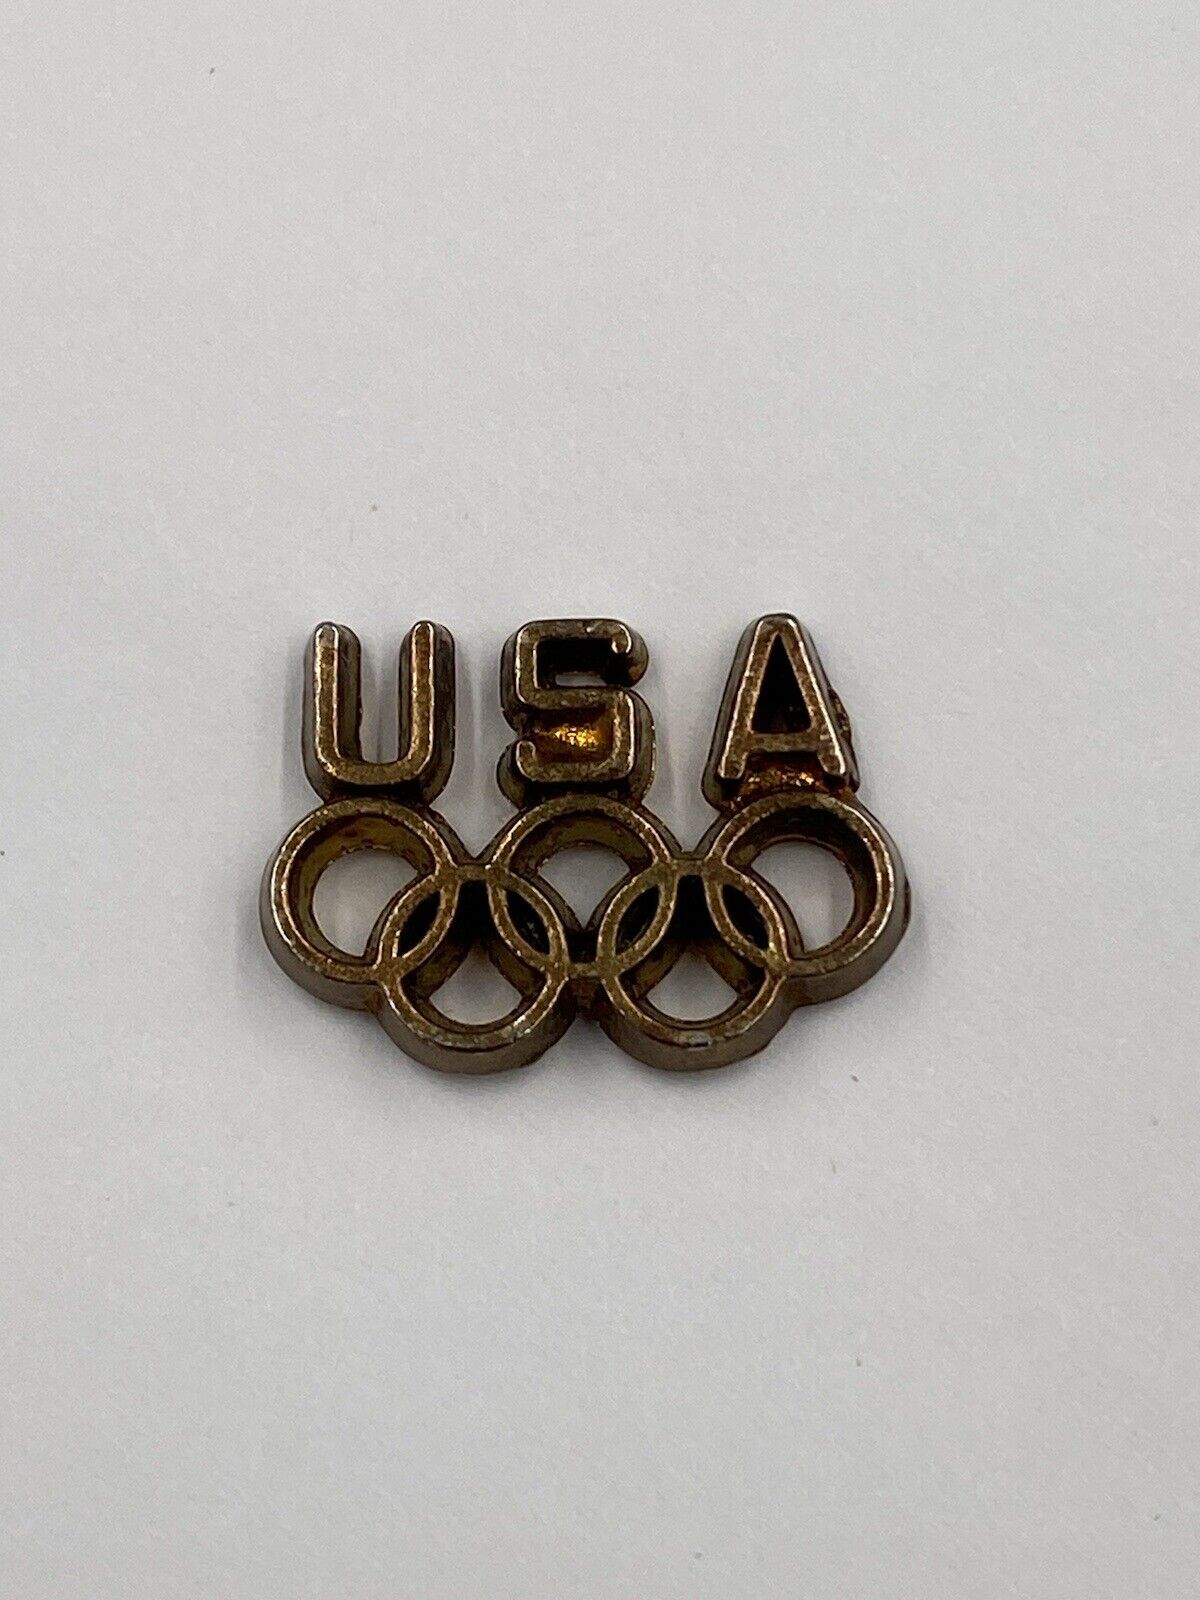 Vintage 90s Team USA Olympic Rings Lapel Pin